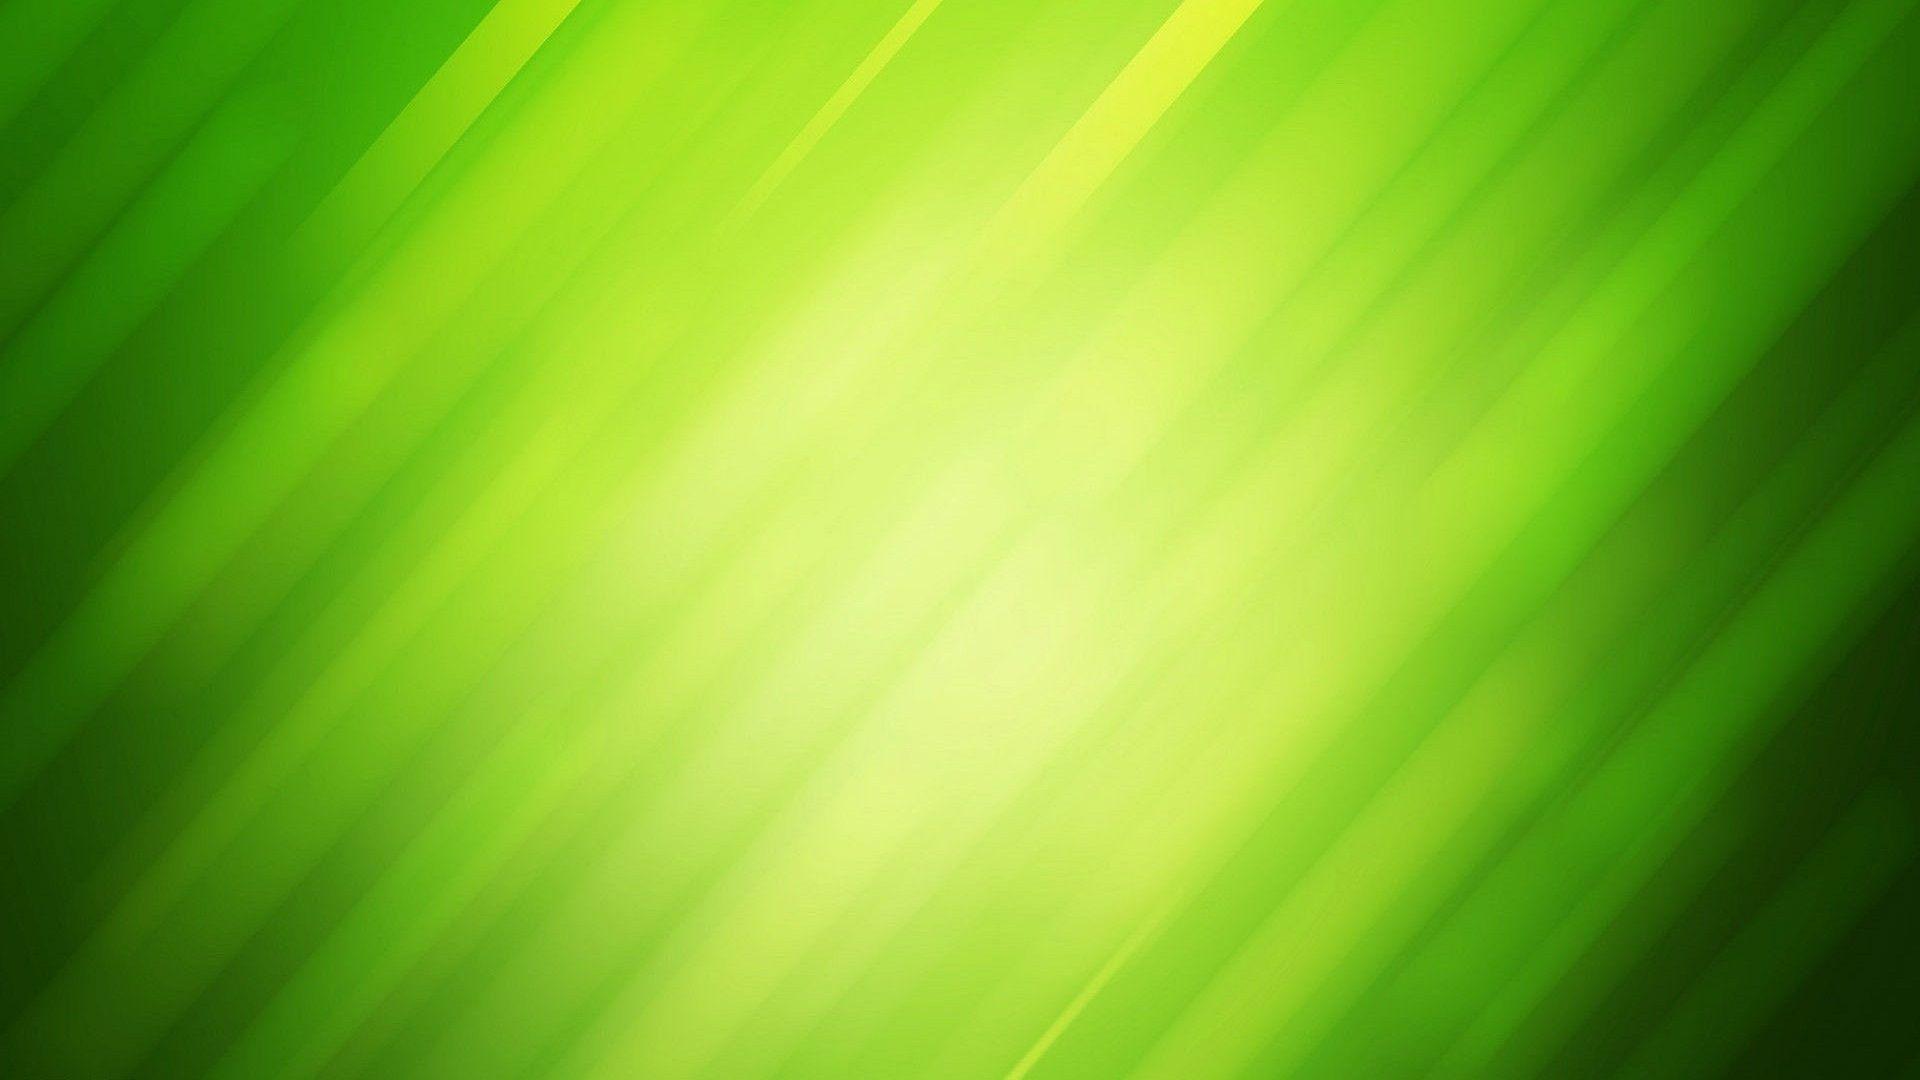 HD wallpaper green yellow and red abstract painting colorful multi  colored  Wallpaper Flare